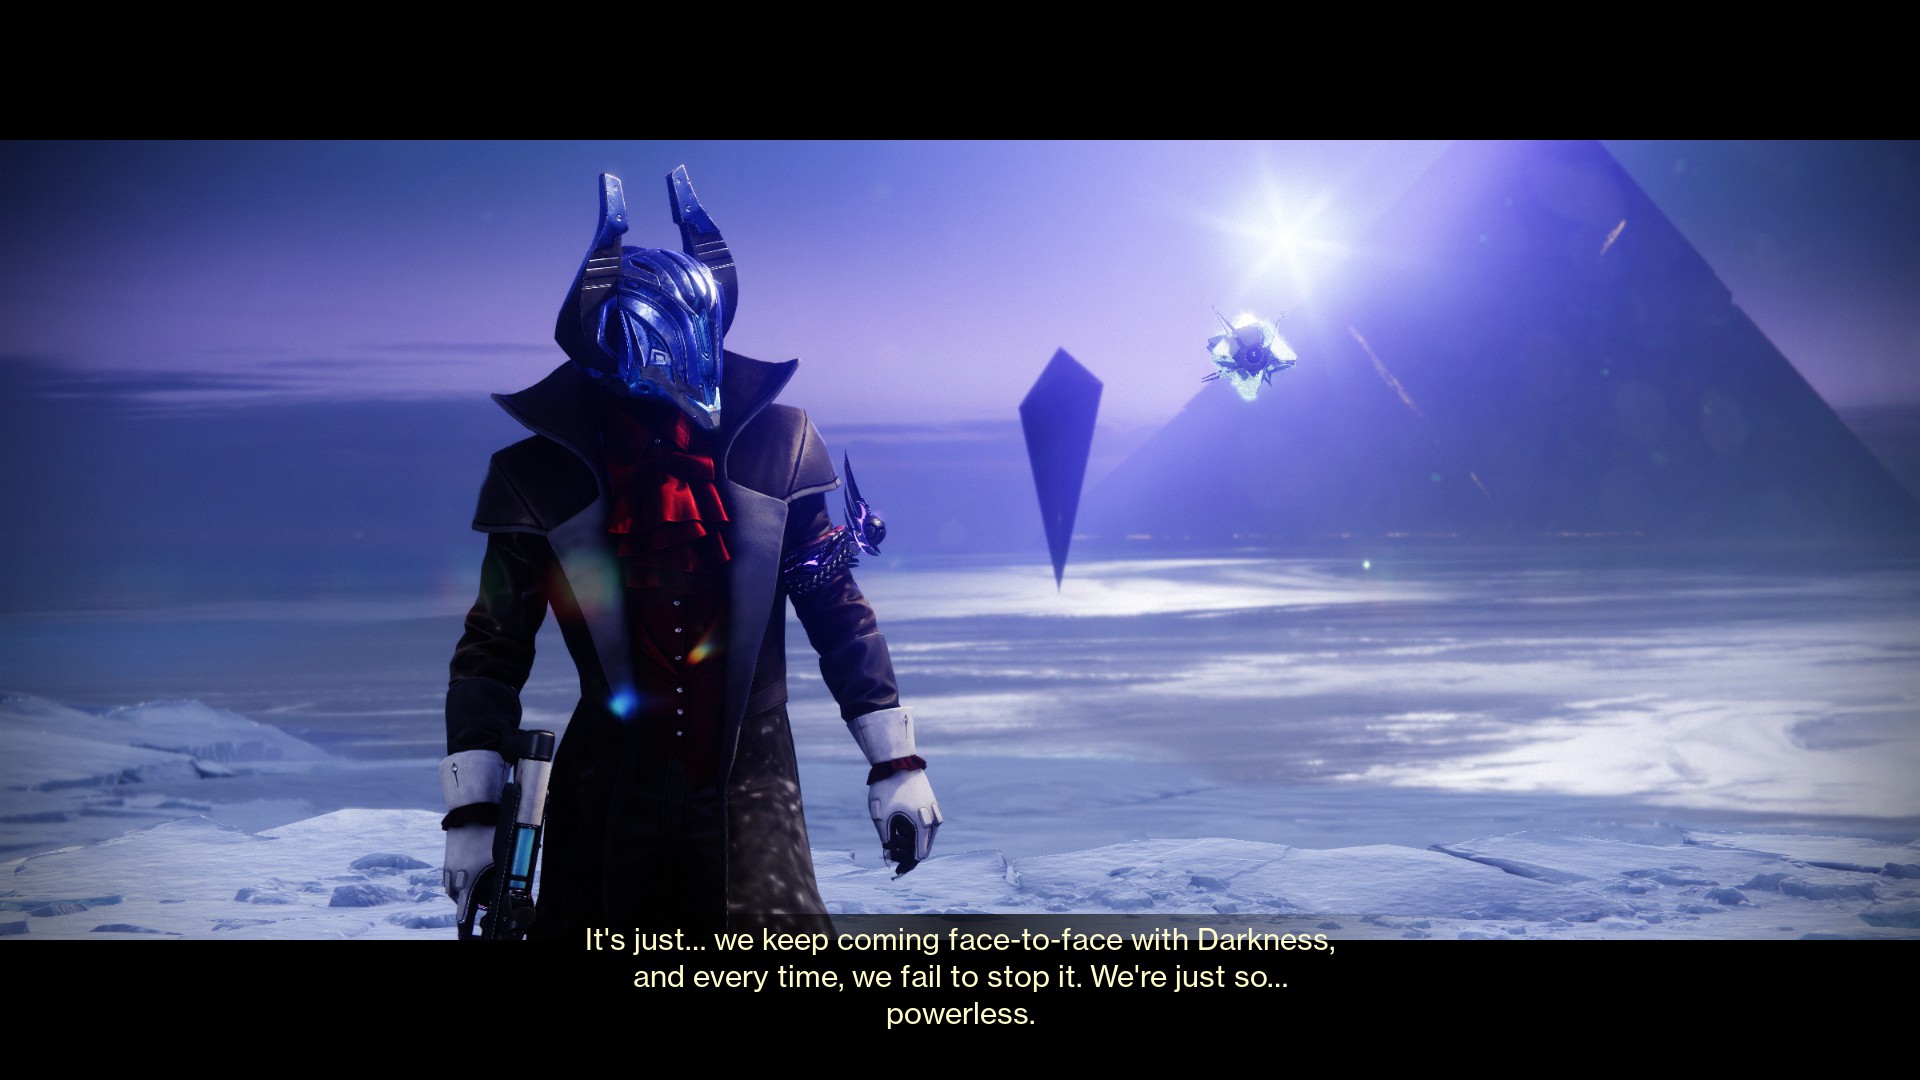 The player character talking to their ghost "It's just...we keep coming face-to-face with the darkness , and every time, we fail to stop it. We're just so...powerless."